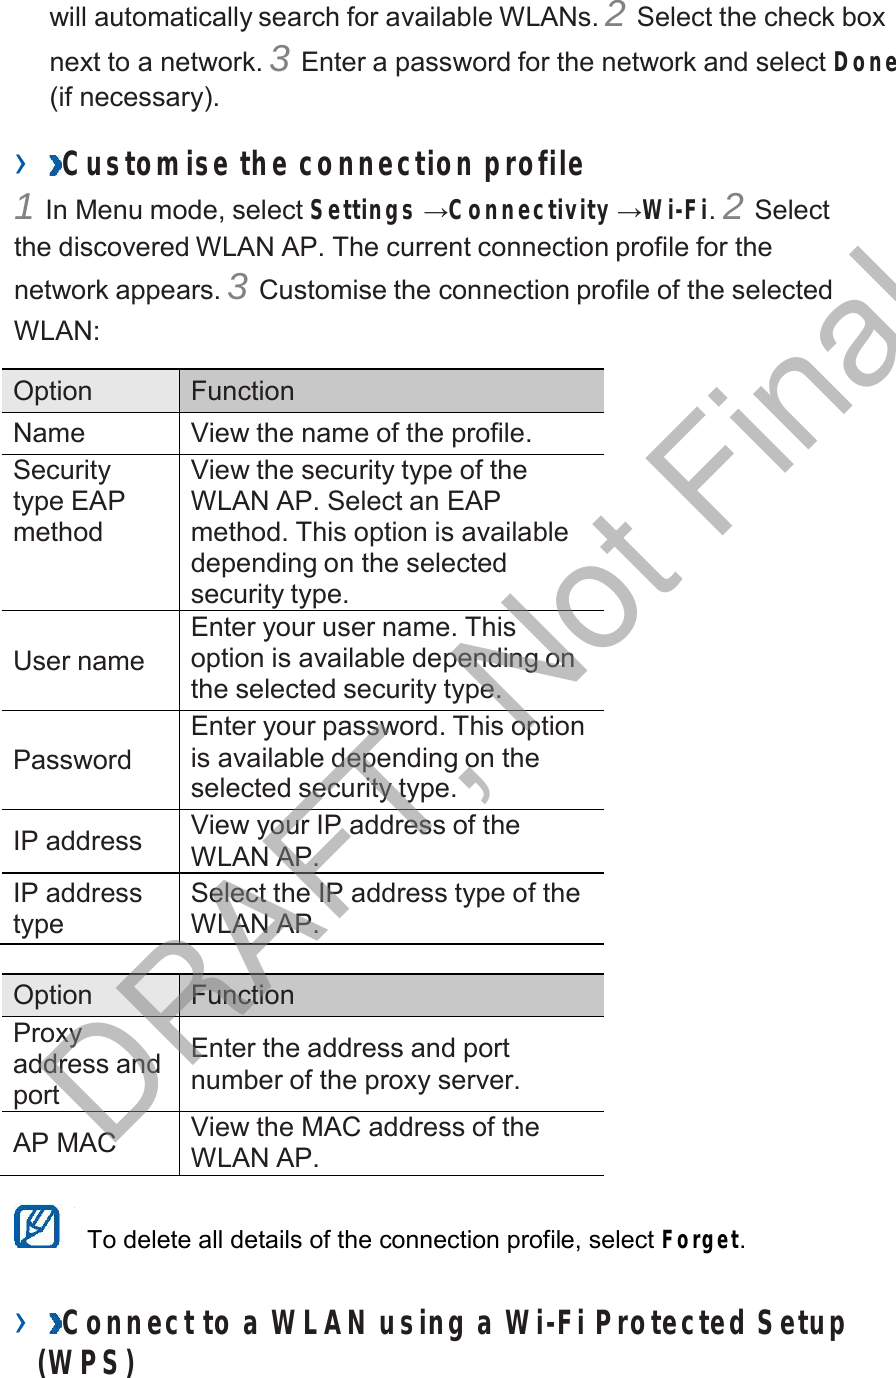  will automatically search for available WLANs. 2 Select the check box next to a network. 3 Enter a password for the network and select Done (if necessary).  ›  Customise the connection profile 1 In Menu mode, select Settings →Connectivity →Wi-Fi. 2 Select the discovered WLAN AP. The current connection profile for the network appears. 3 Customise the connection profile of the selected WLAN:  Option Function Name View the name of the profile. Security type EAP method View the security type of the WLAN AP. Select an EAP method. This option is available depending on the selected security type.   User name Enter your user name. This option is available depending on the selected security type.   Password Enter your password. This option is available depending on the selected security type.  IP address View your IP address of the WLAN AP. IP address type Select the IP address type of the WLAN AP.  Option Function Proxy address and port  Enter the address and port number of the proxy server.  AP MAC View the MAC address of the WLAN AP.   To delete all details of the connection profile, select Forget.   ›  Connect to a WLAN using a Wi-Fi Protected Setup (W PS) DRAFT, Not Final